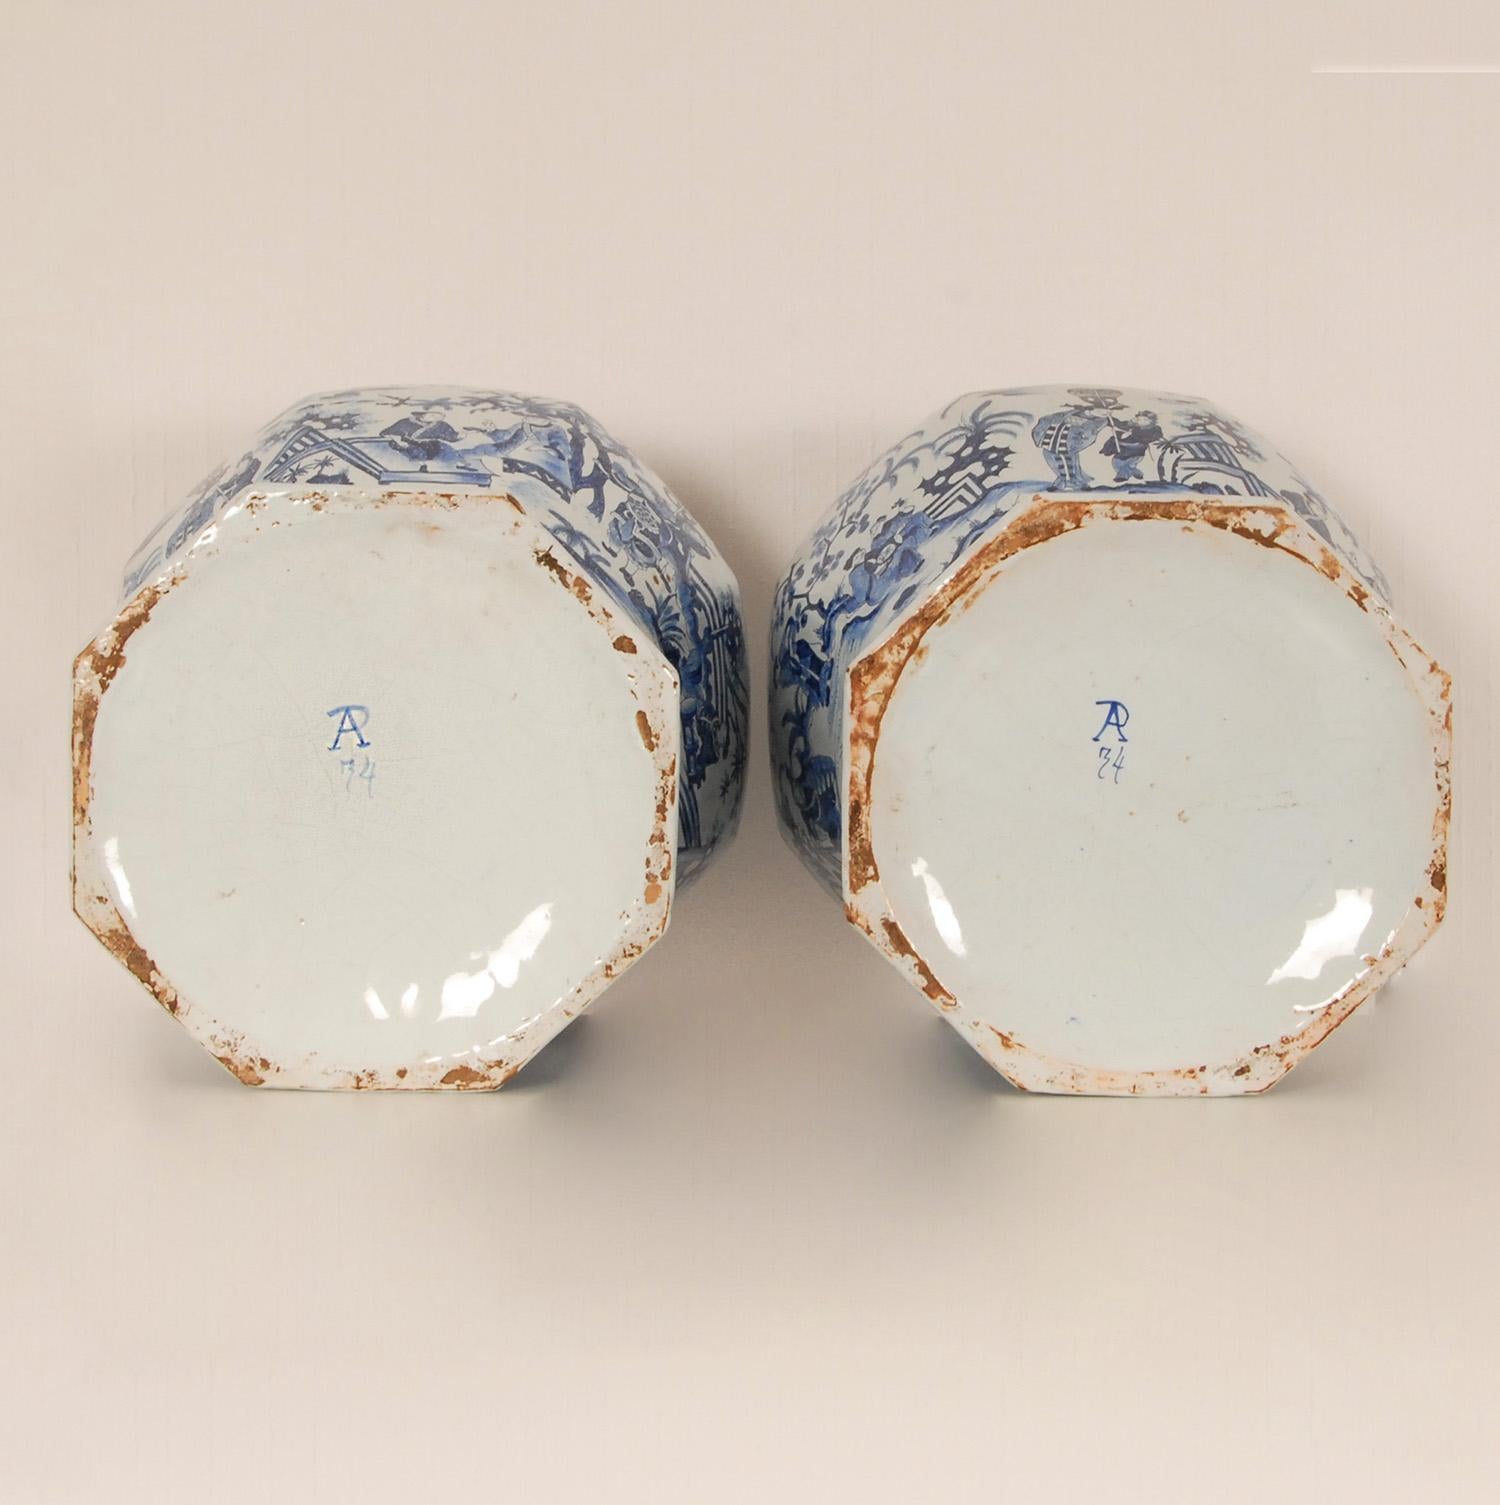 Delft Vases 17th century Style Earthenware Blue White Tall Baluster Vases a pair 4